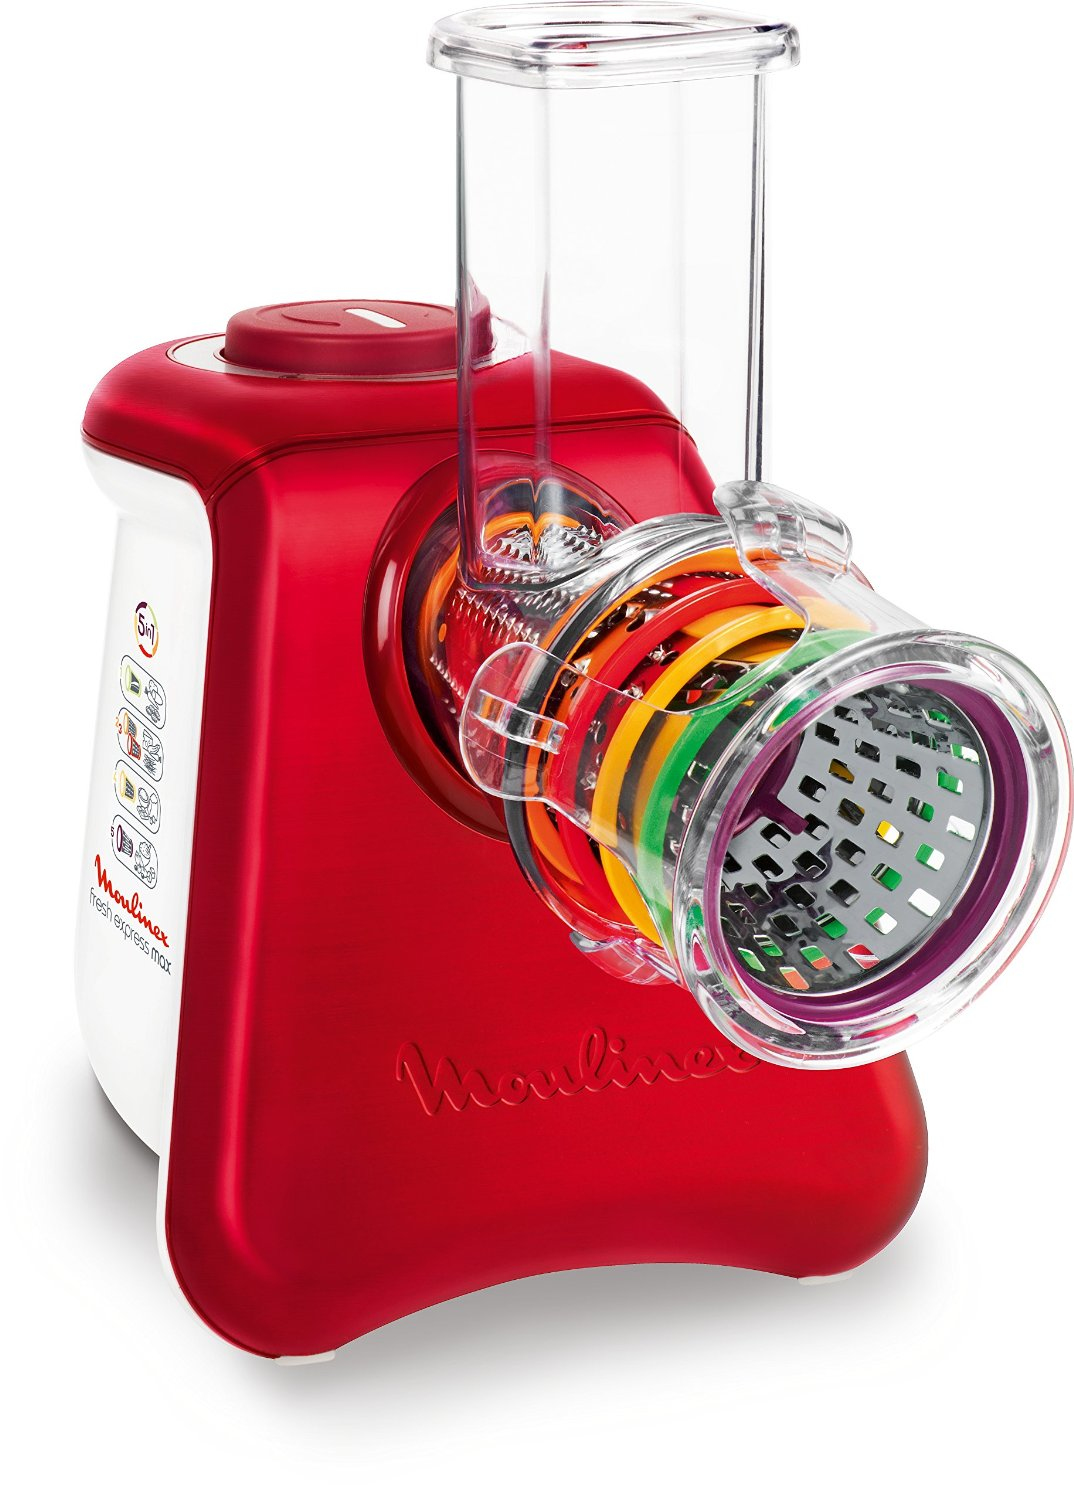 Moulinex fresh express max 5-in-1